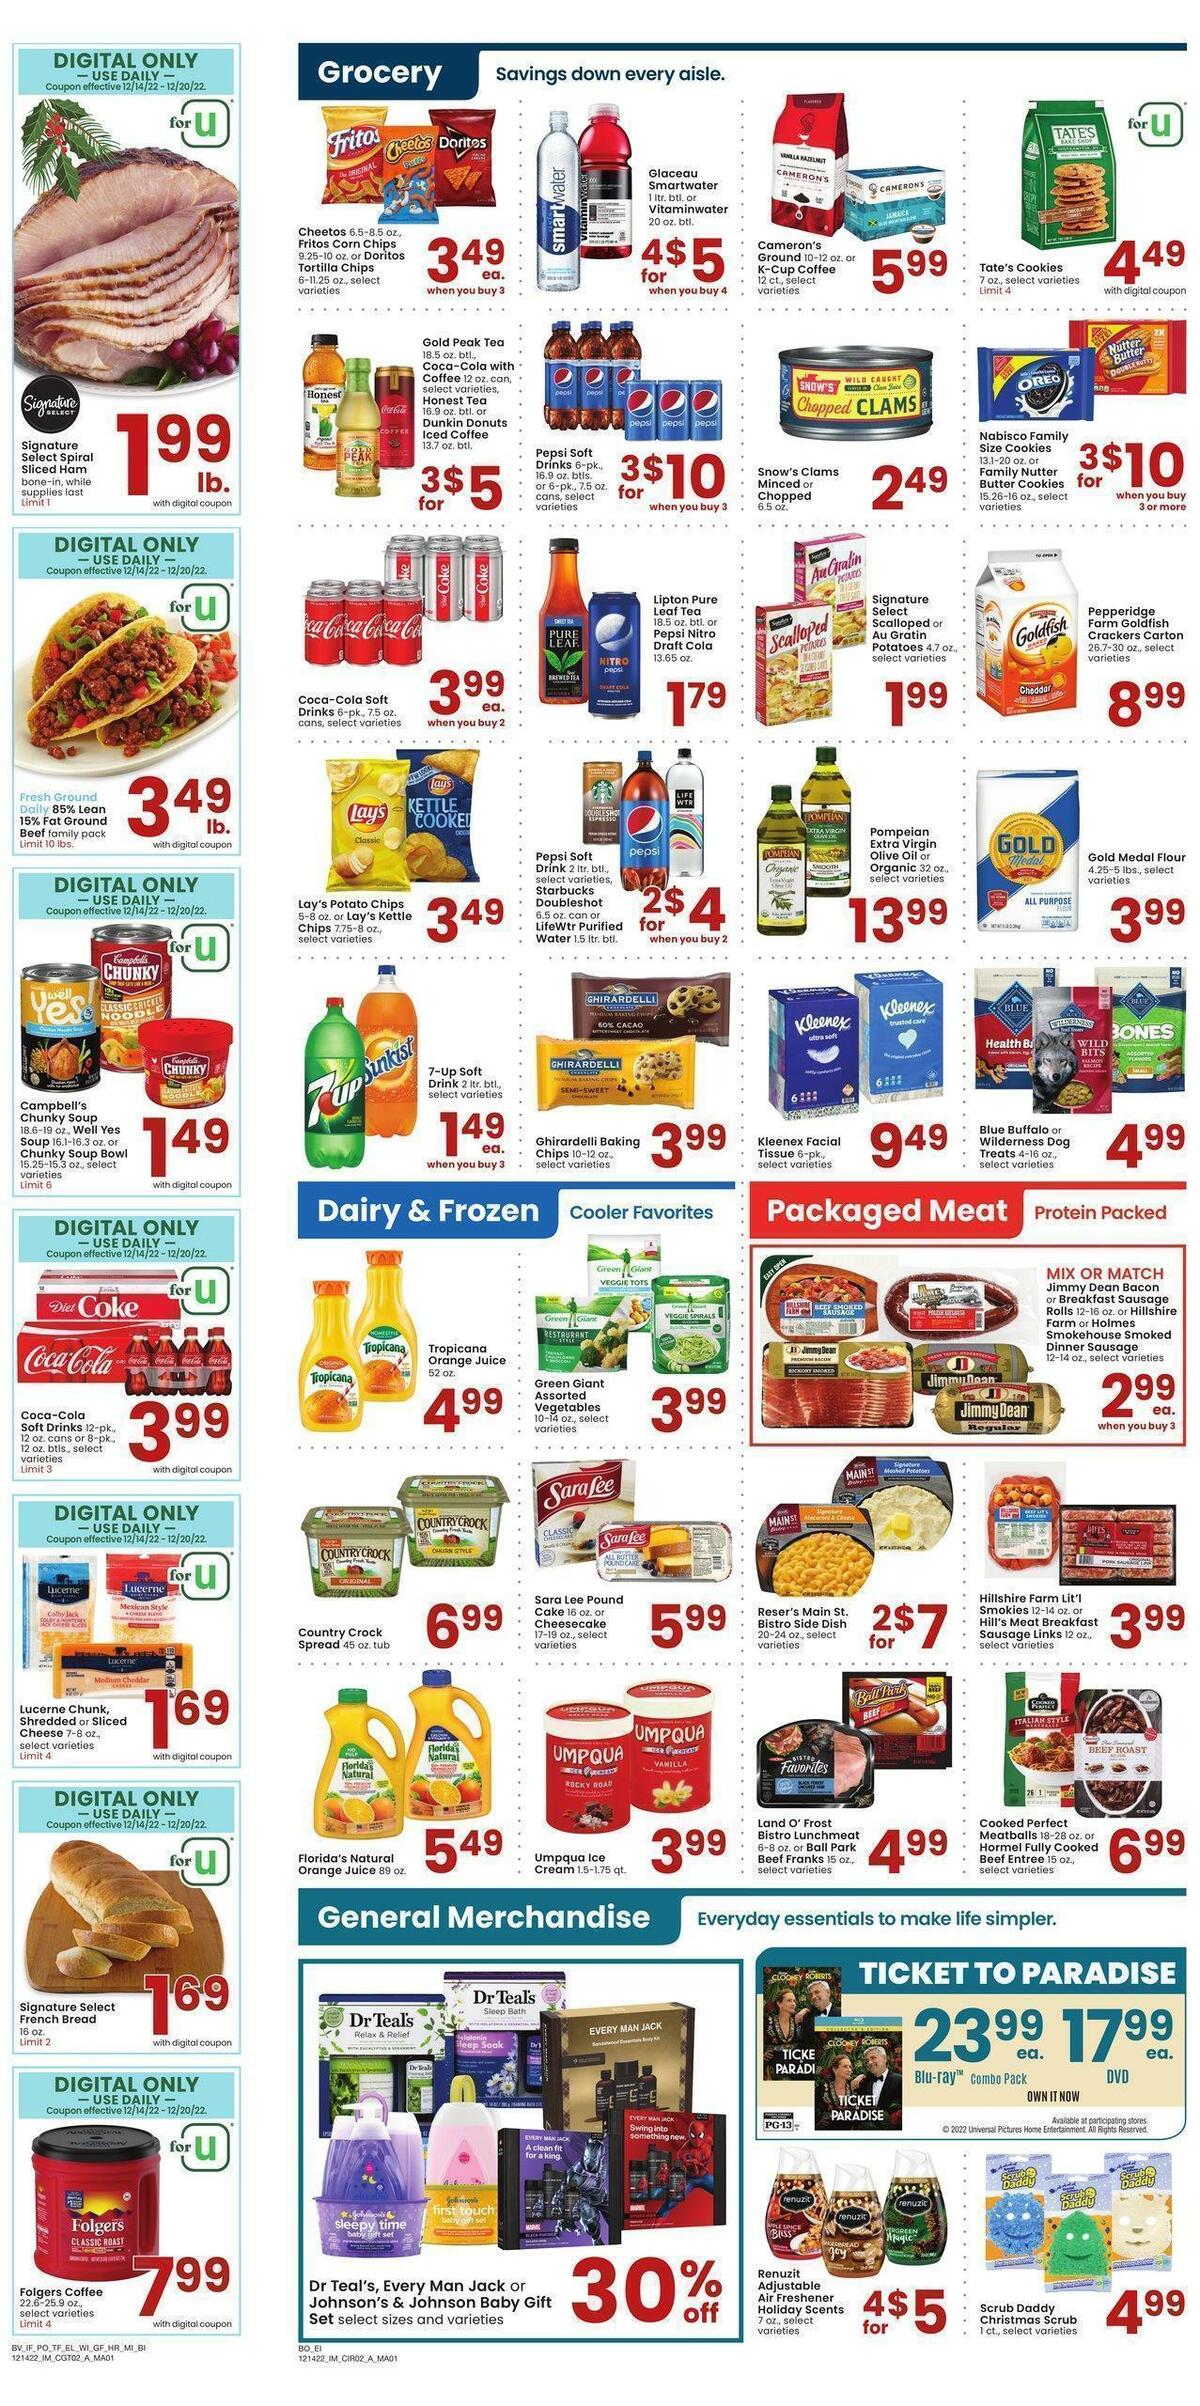 Albertsons Weekly Ads & Special Buys from December 14 - Page 2